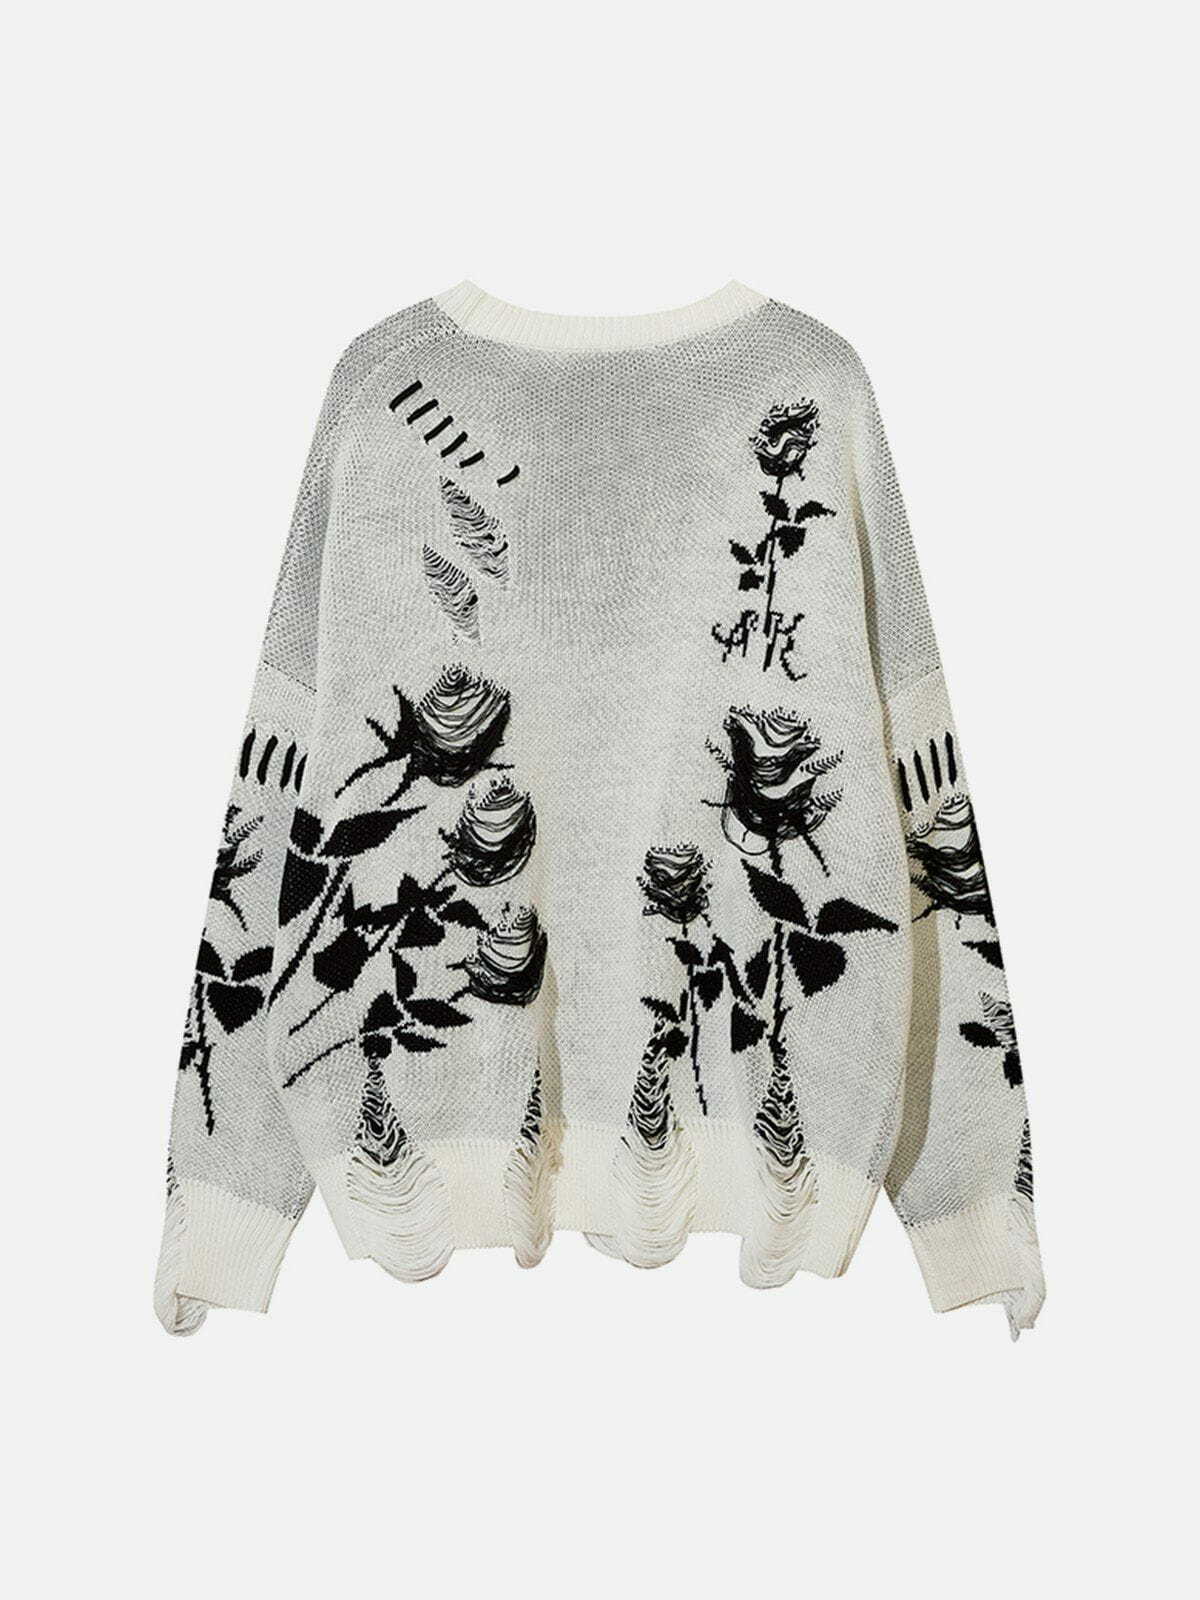 raw edge rose sweater quirky floral streetwear 3749